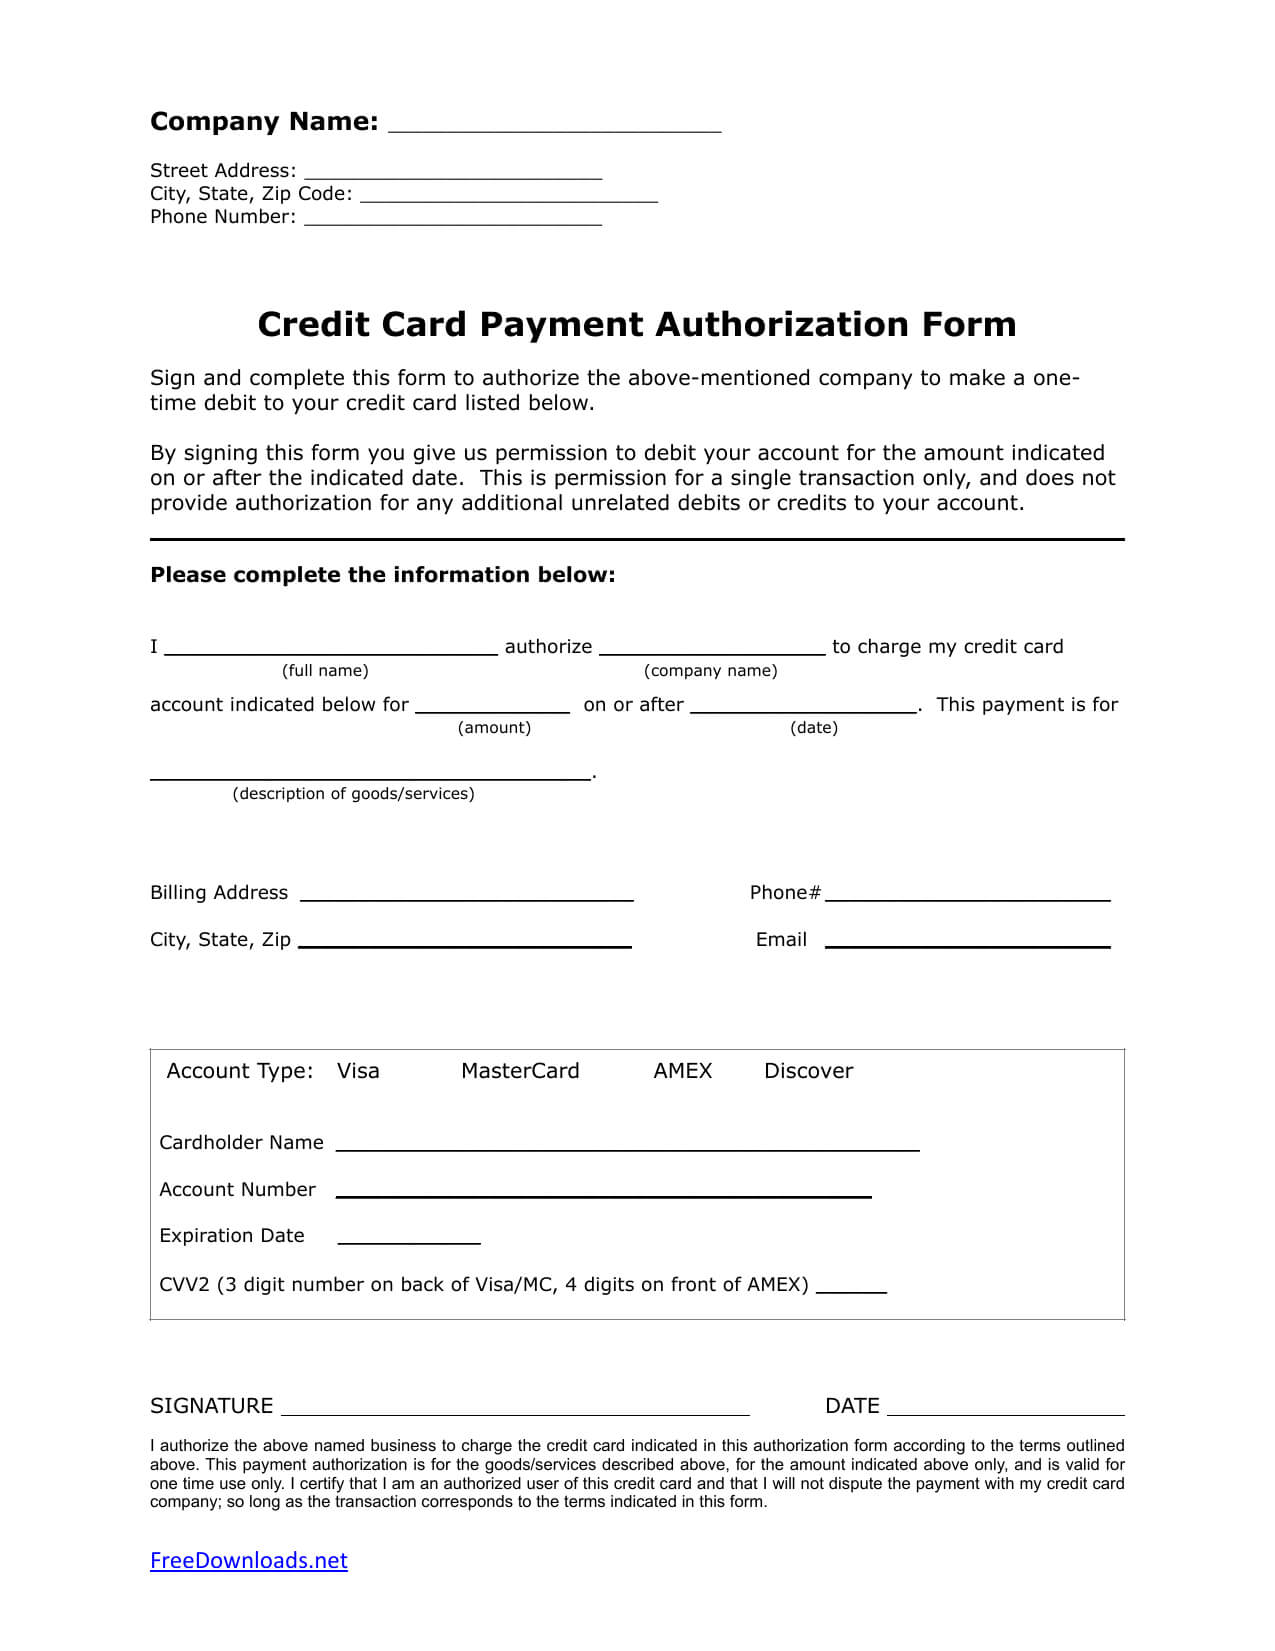 Download One (1) Time Credit Card Authorization Payment Form With Credit Card Billing Authorization Form Template